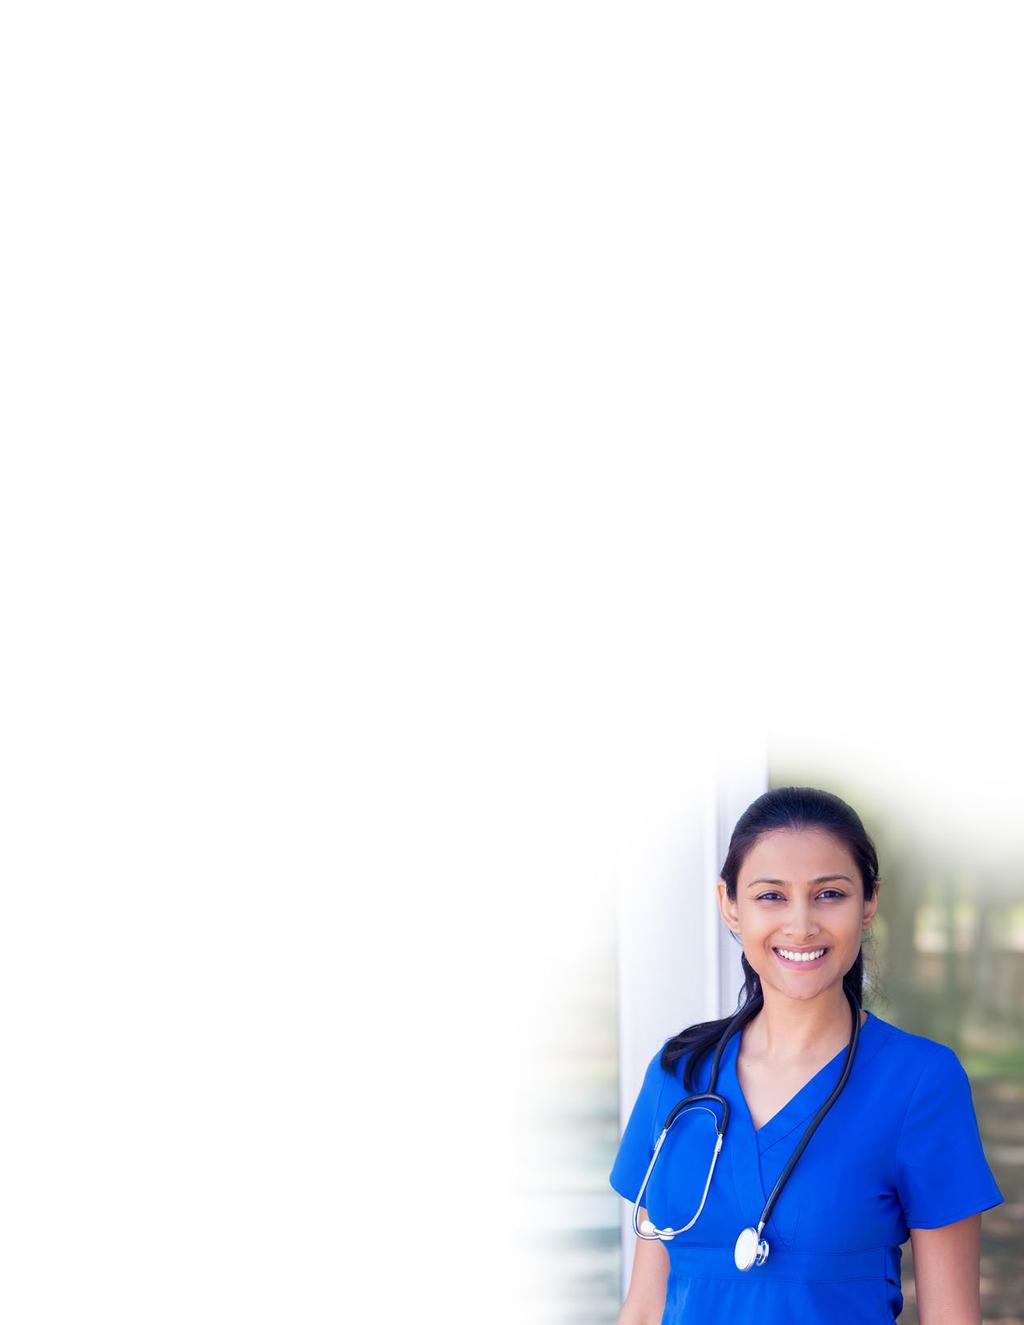 The Process There is evidence and research to show that the more focused you are in your study and preparation, the more likely you are to be successful in the NCLEX-RN examination.